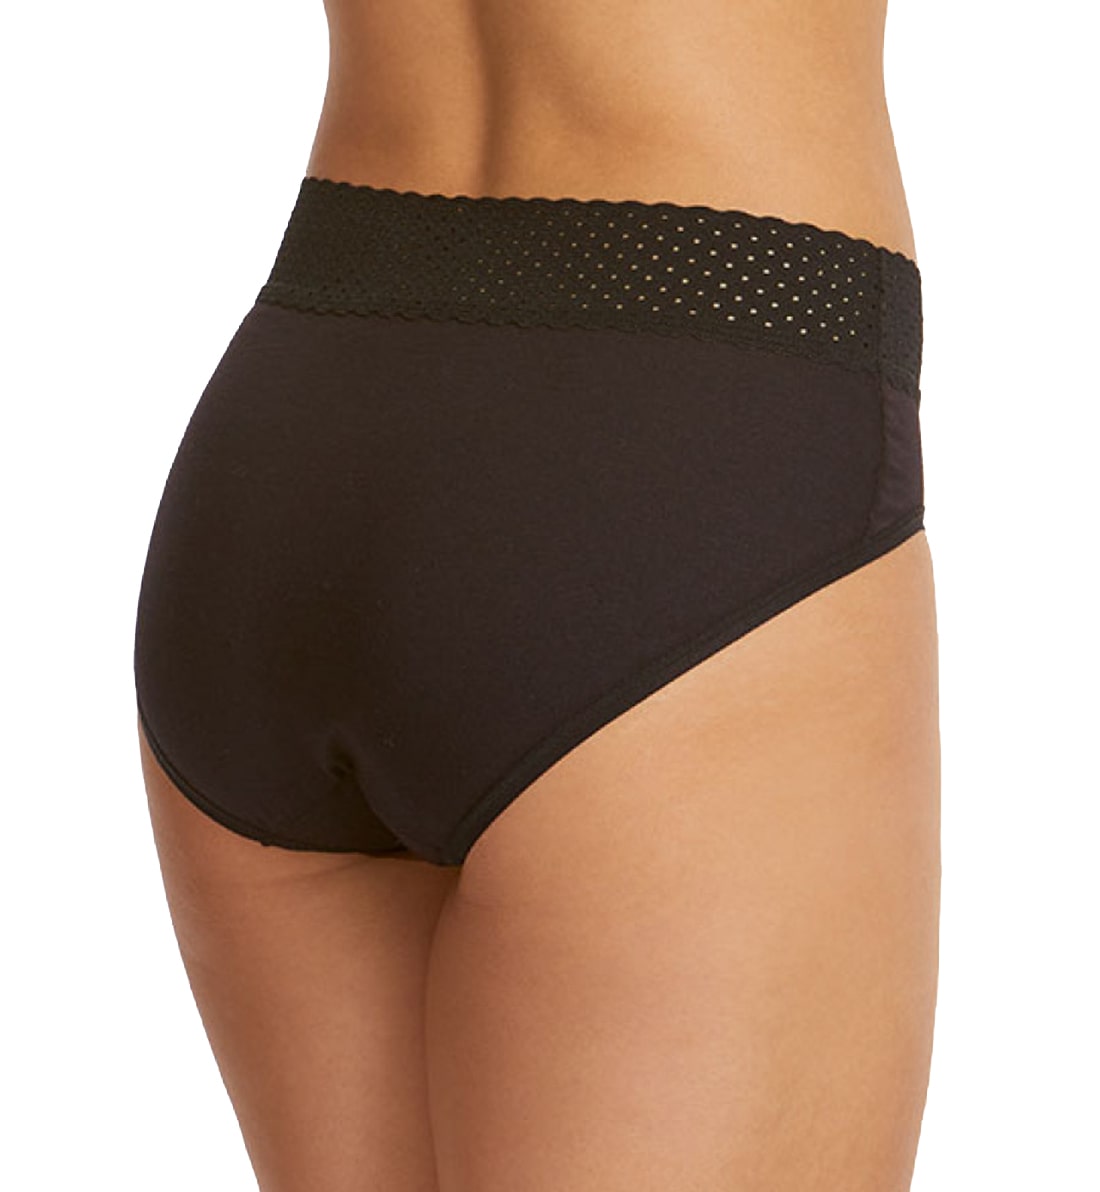 Hanky Panky Organic Cotton French Brief with Lace (792131),Small,Black - Black,Small